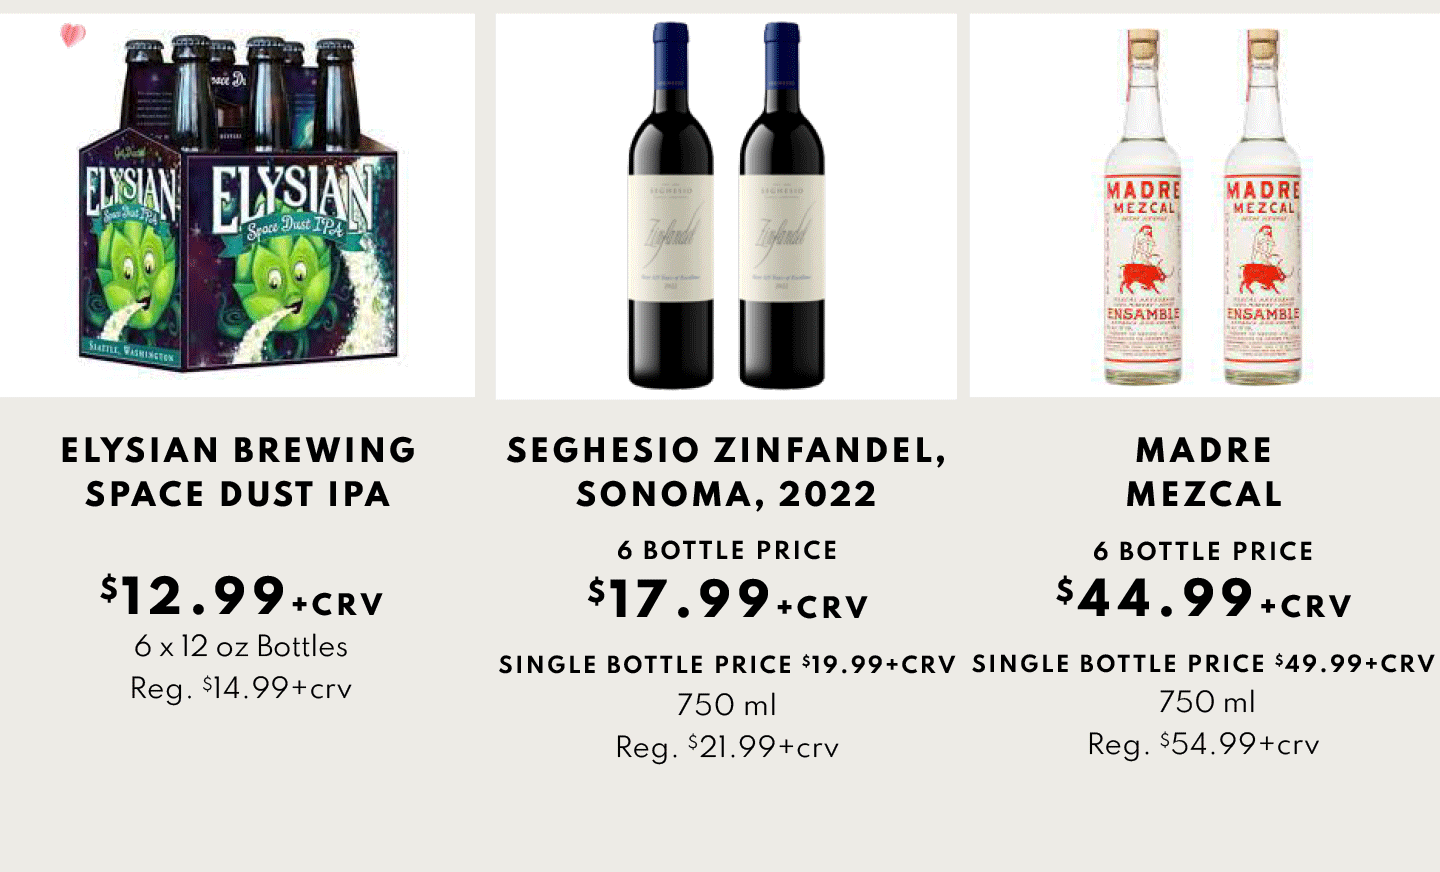 Elusian Brewing Space dust IPA $12.99, Seghesio Zinfandel, Sonoma, 2022 $17.99 (6 bottle price) and Madre MEcal $44.99 (6 bottle price)